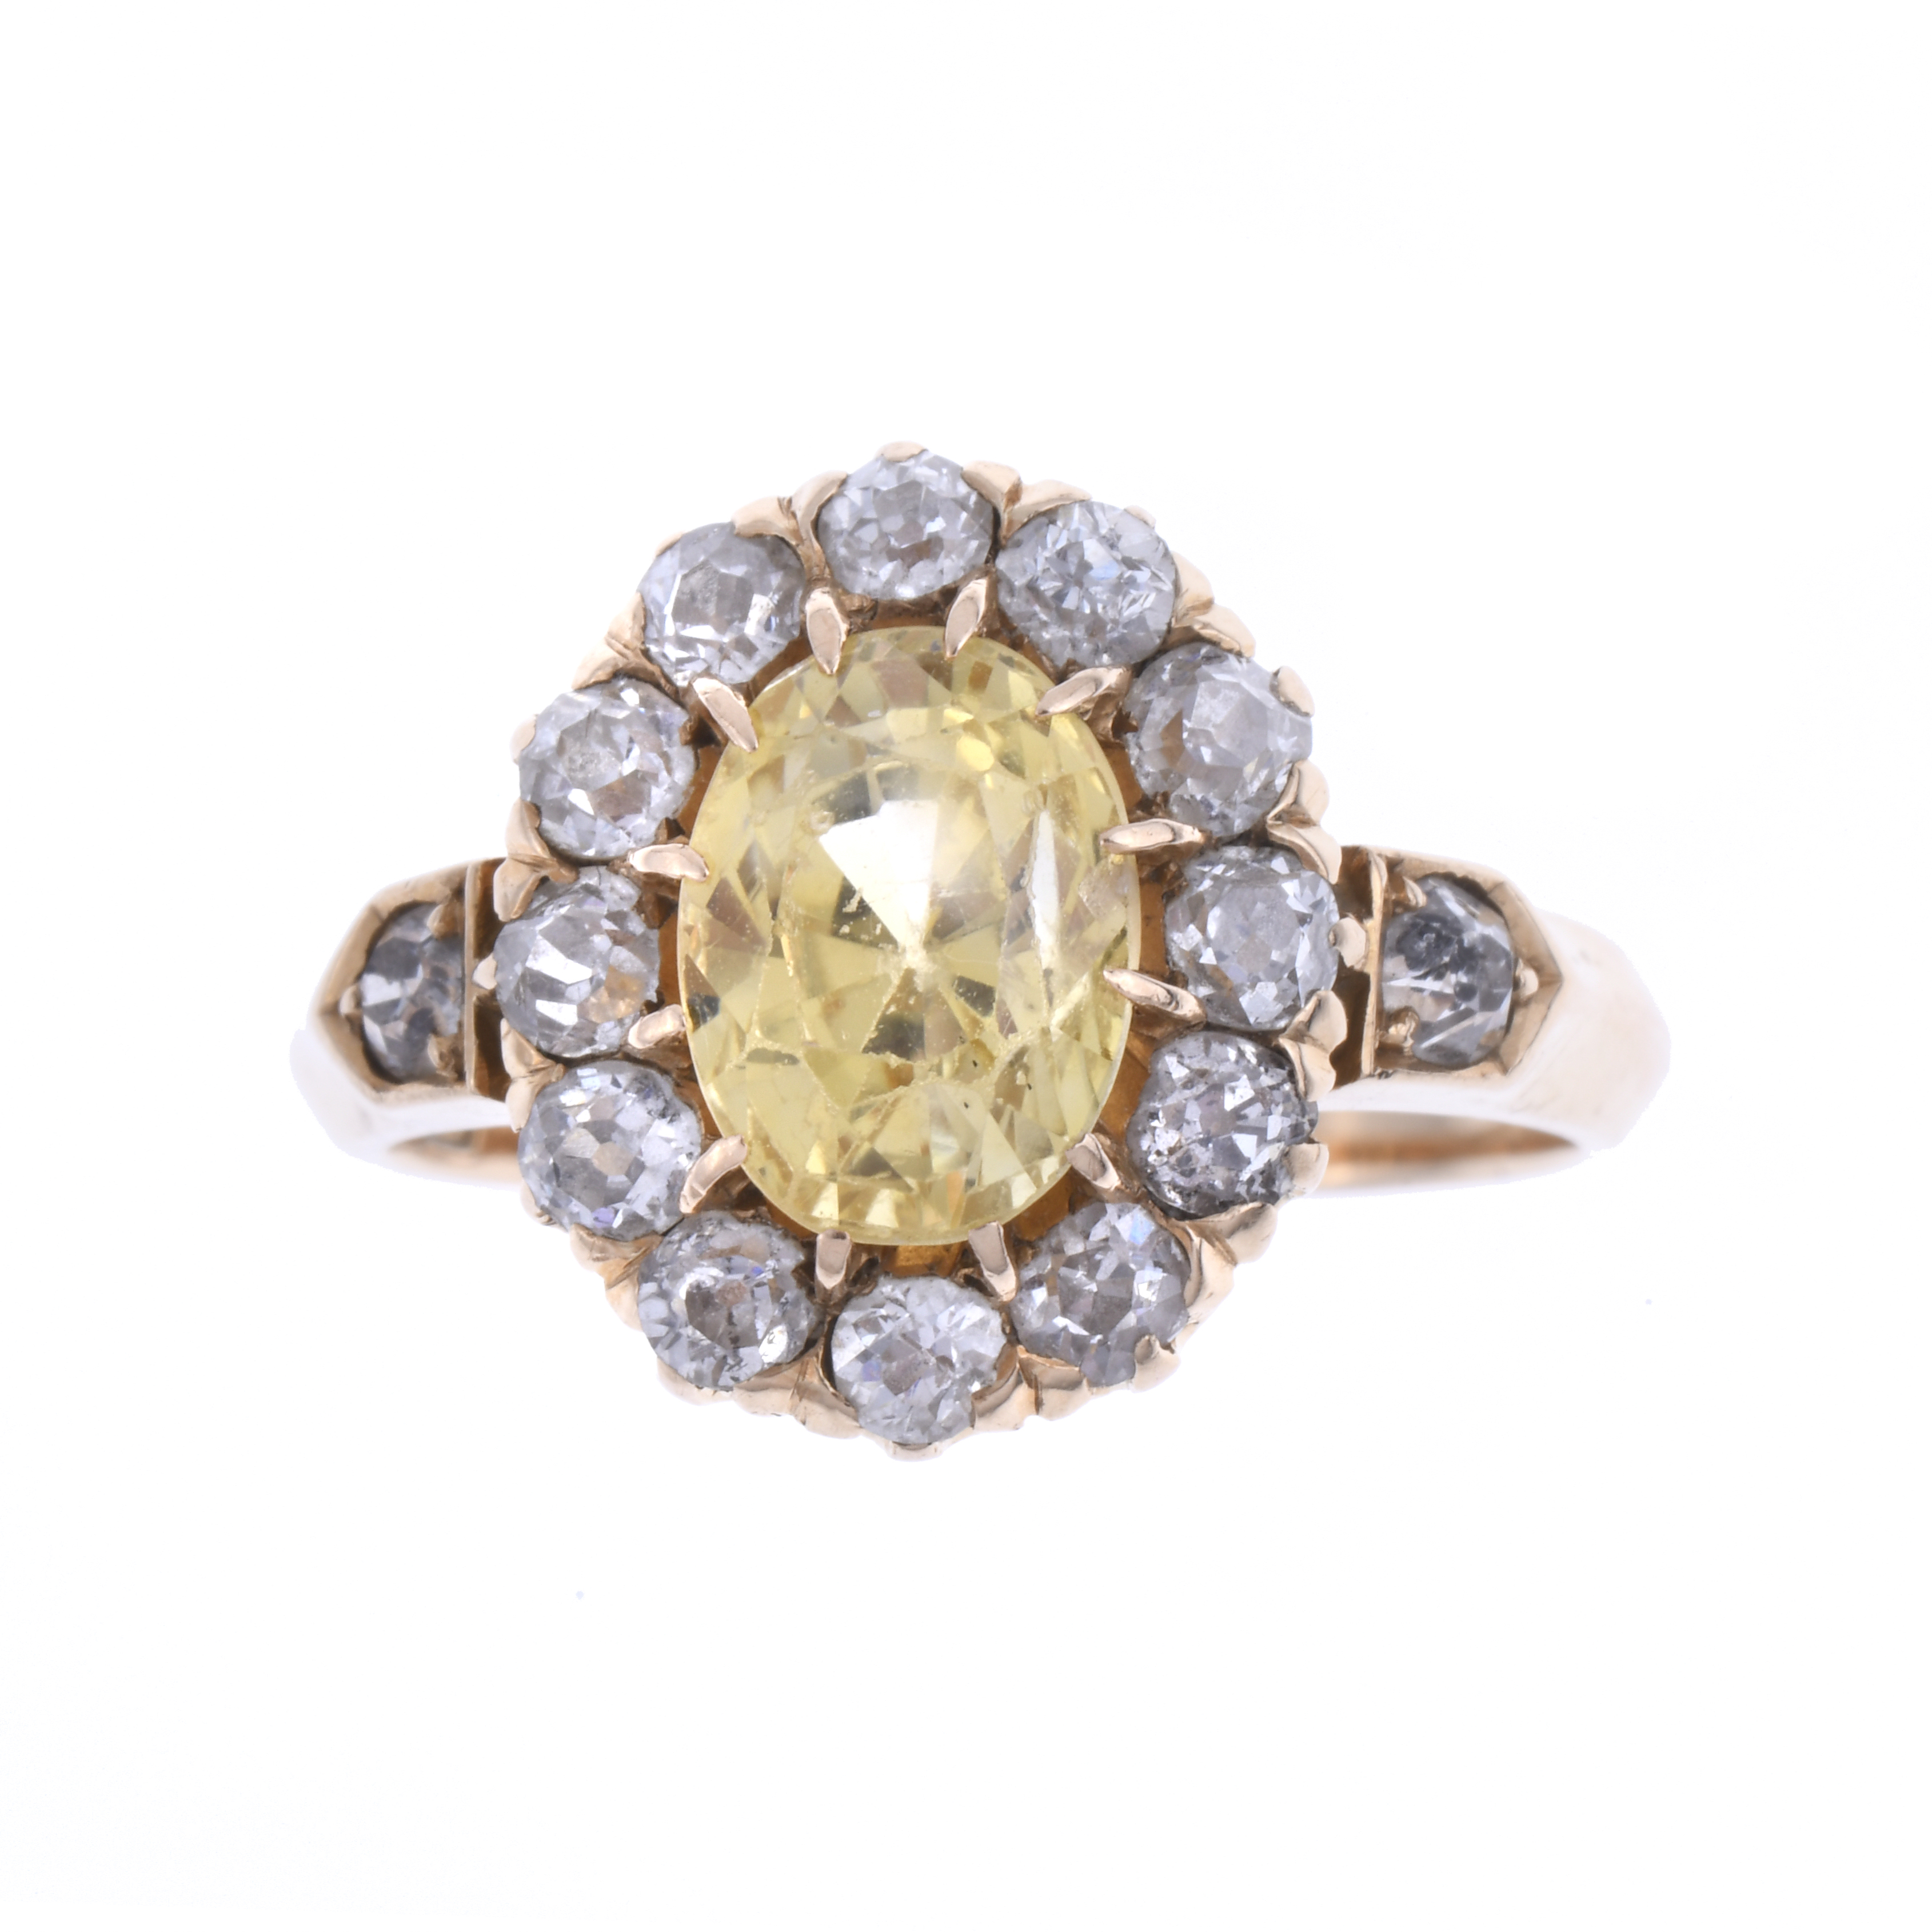 ROSETTE RING WITH CITRINE AND DIAMONDS.